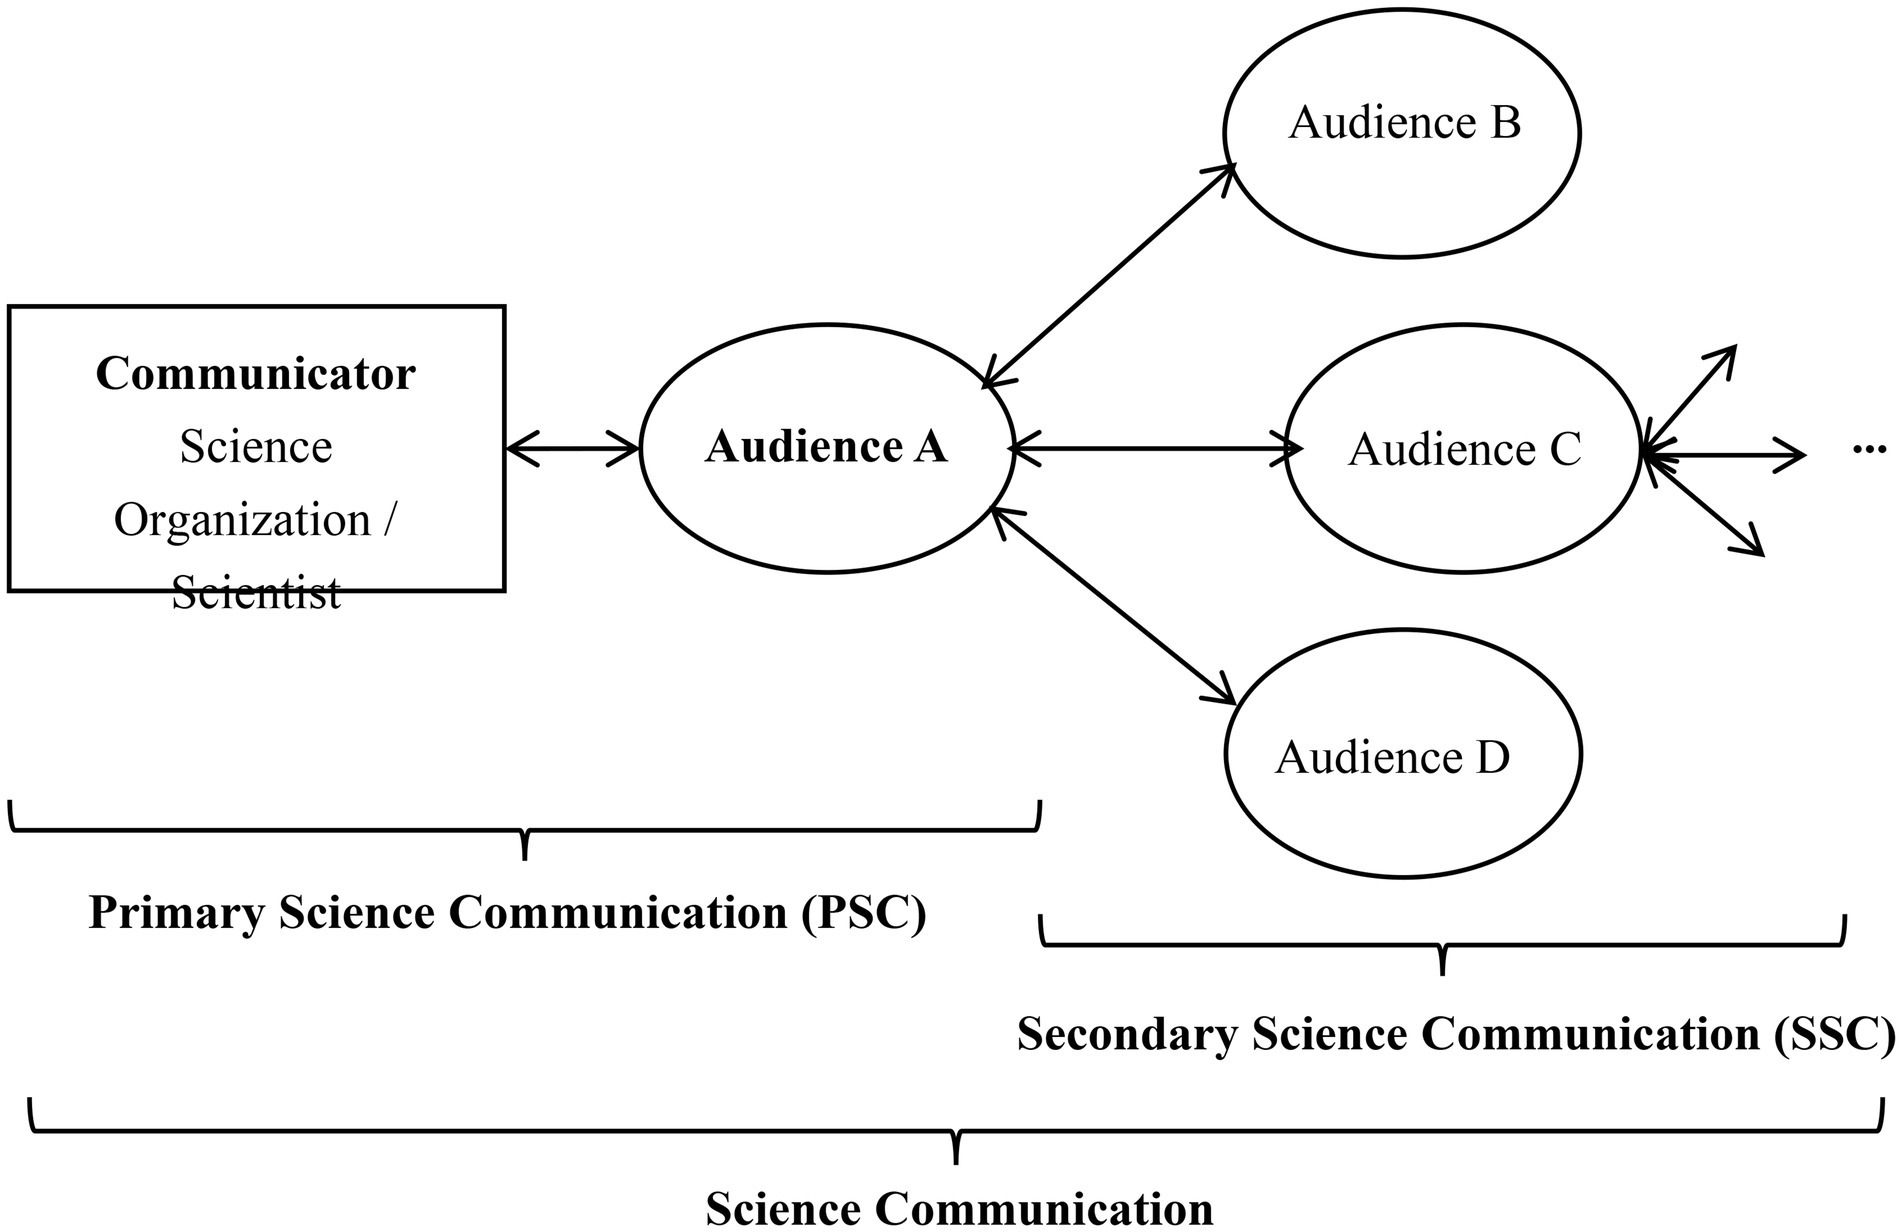 Frontiers Motivation to participate in secondary science communication